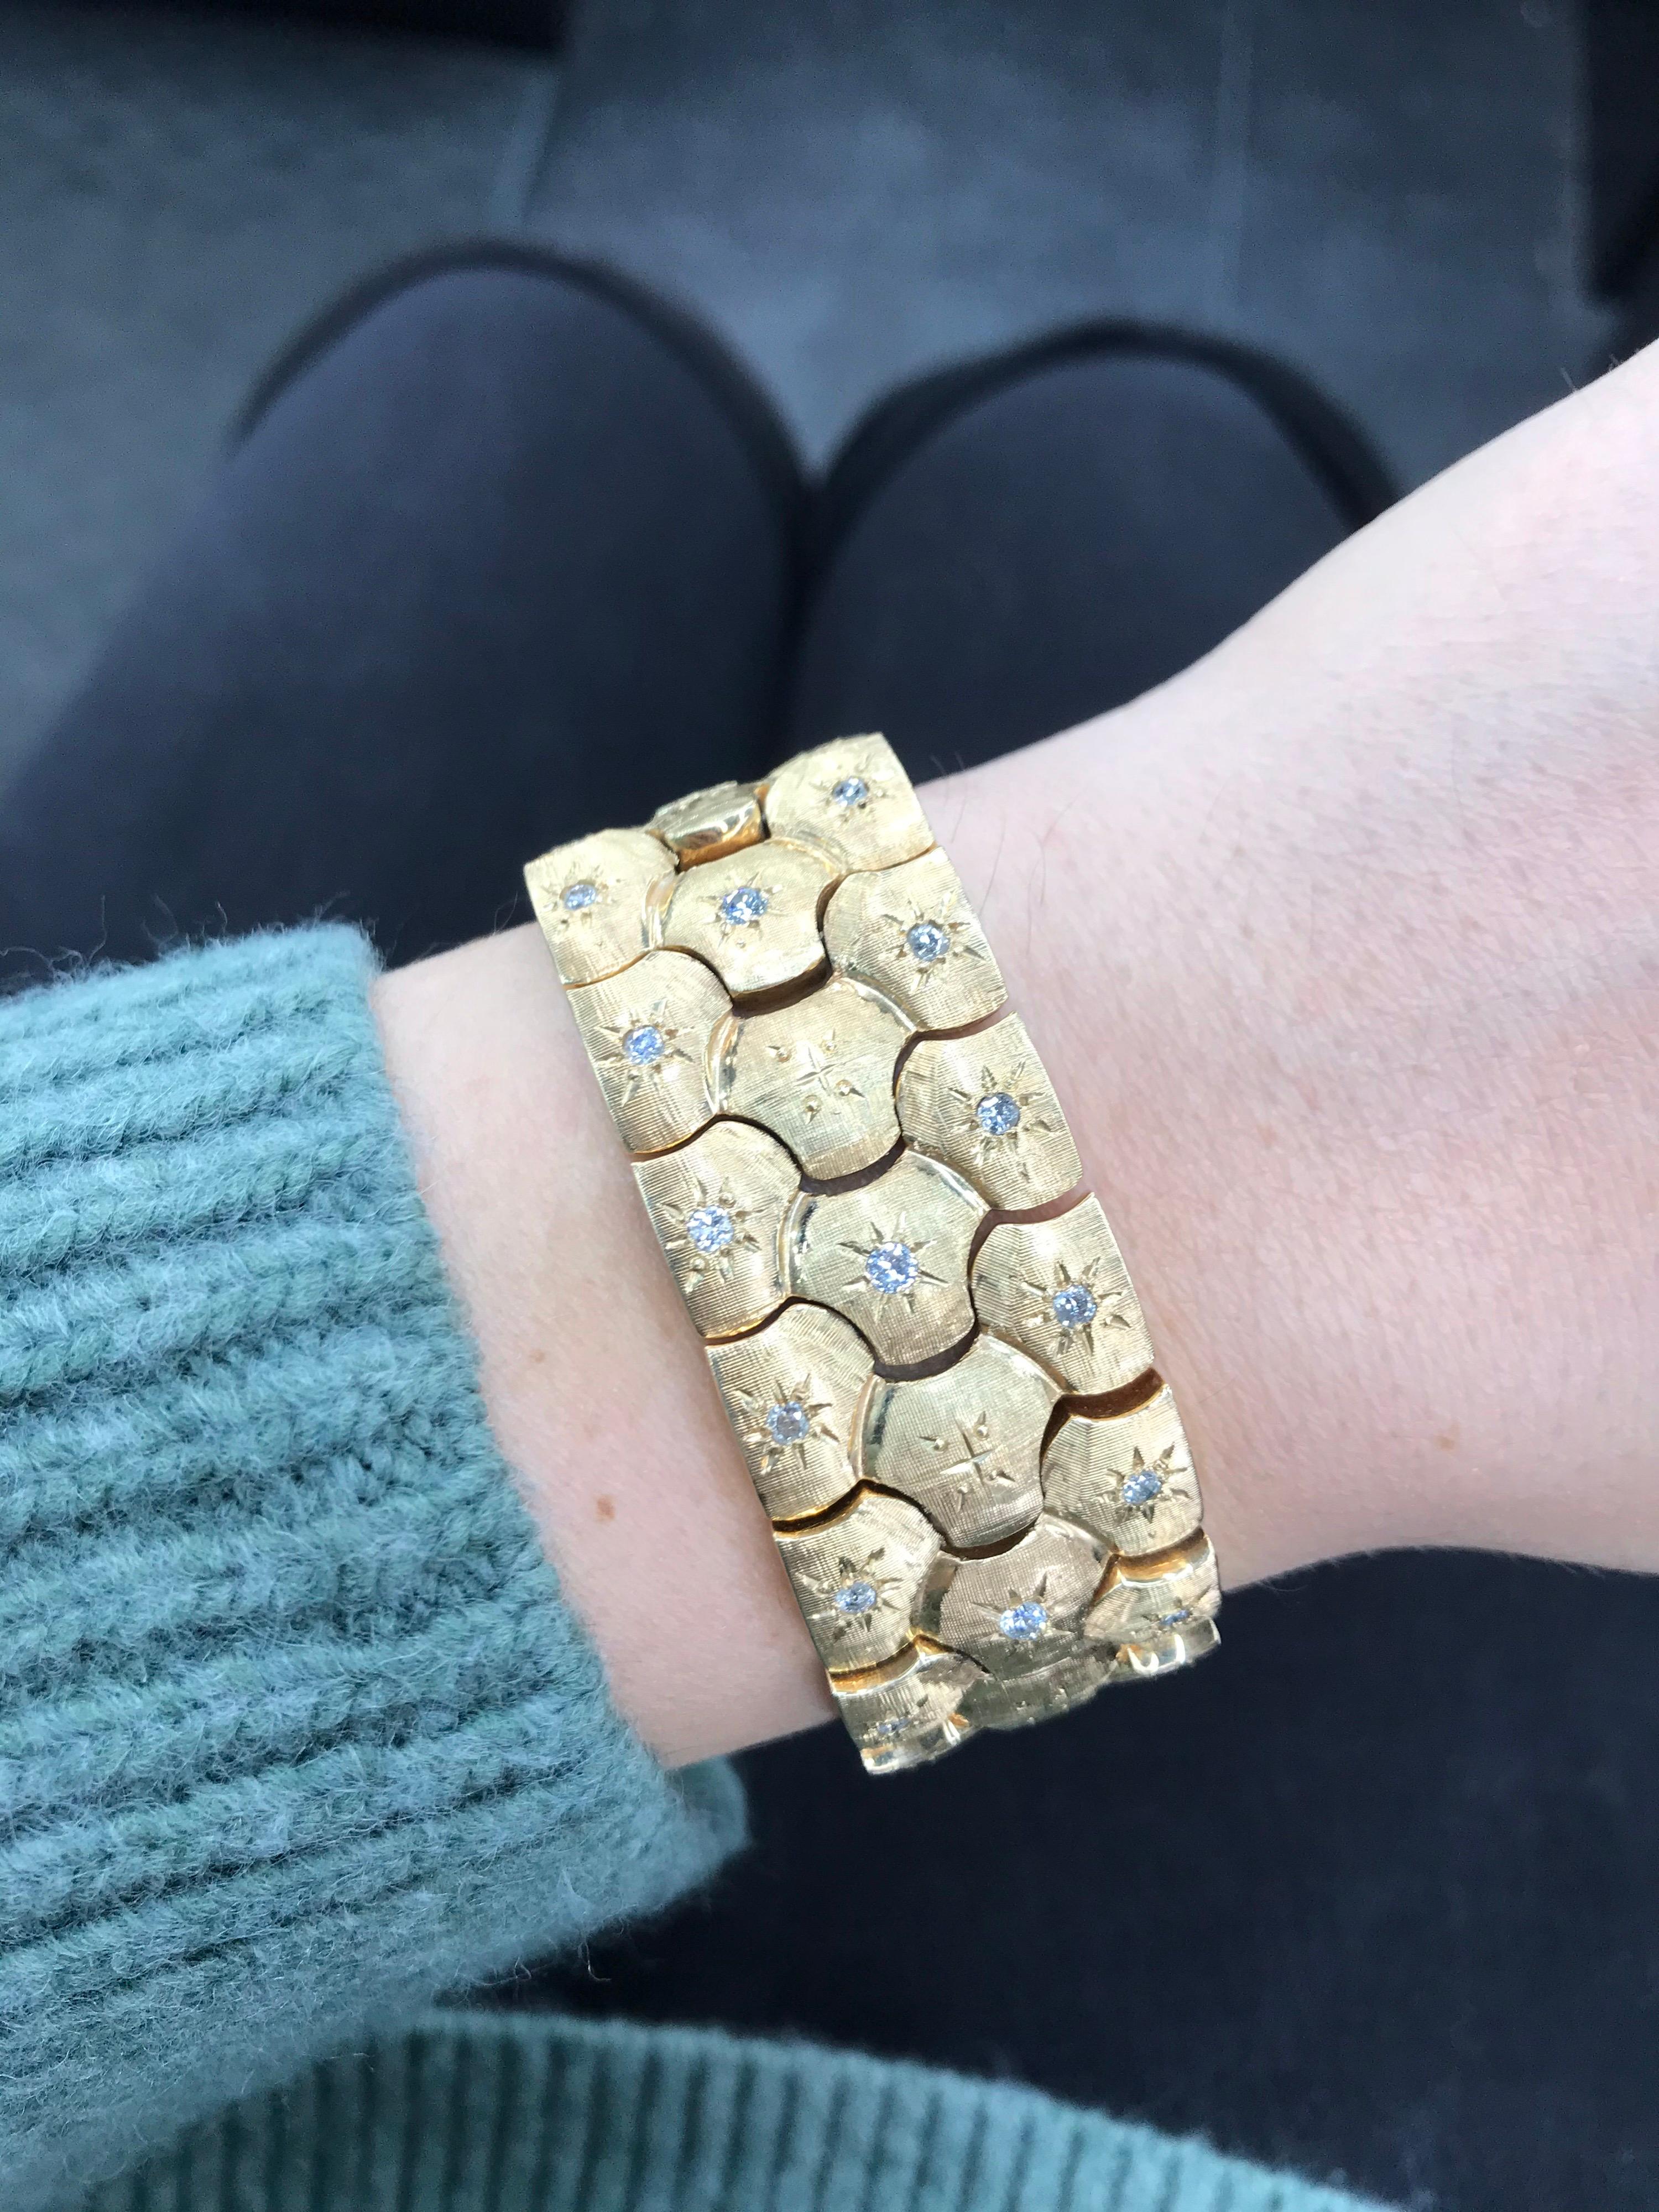 Vintage honeycomb motif bracelet featuring scattered round brilliants weighing 0.60 carats, crafted in 14k Yellow Gold. 
